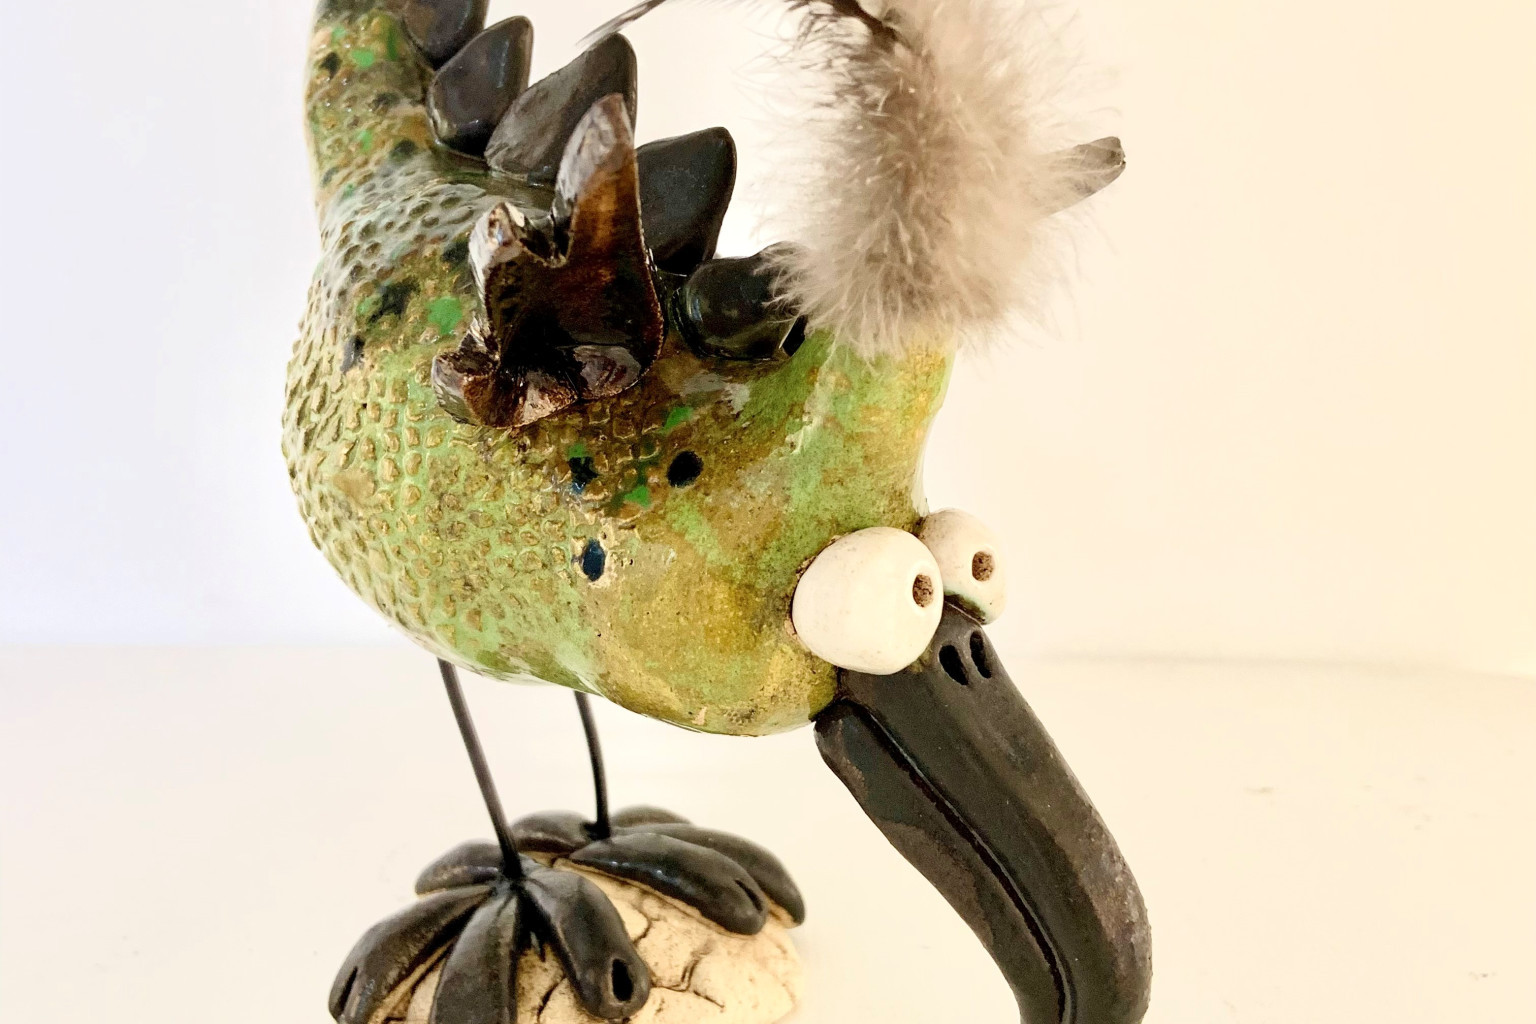 Artists Linda Bates will pass on knowledge on how to make her quirky ceramic figures.